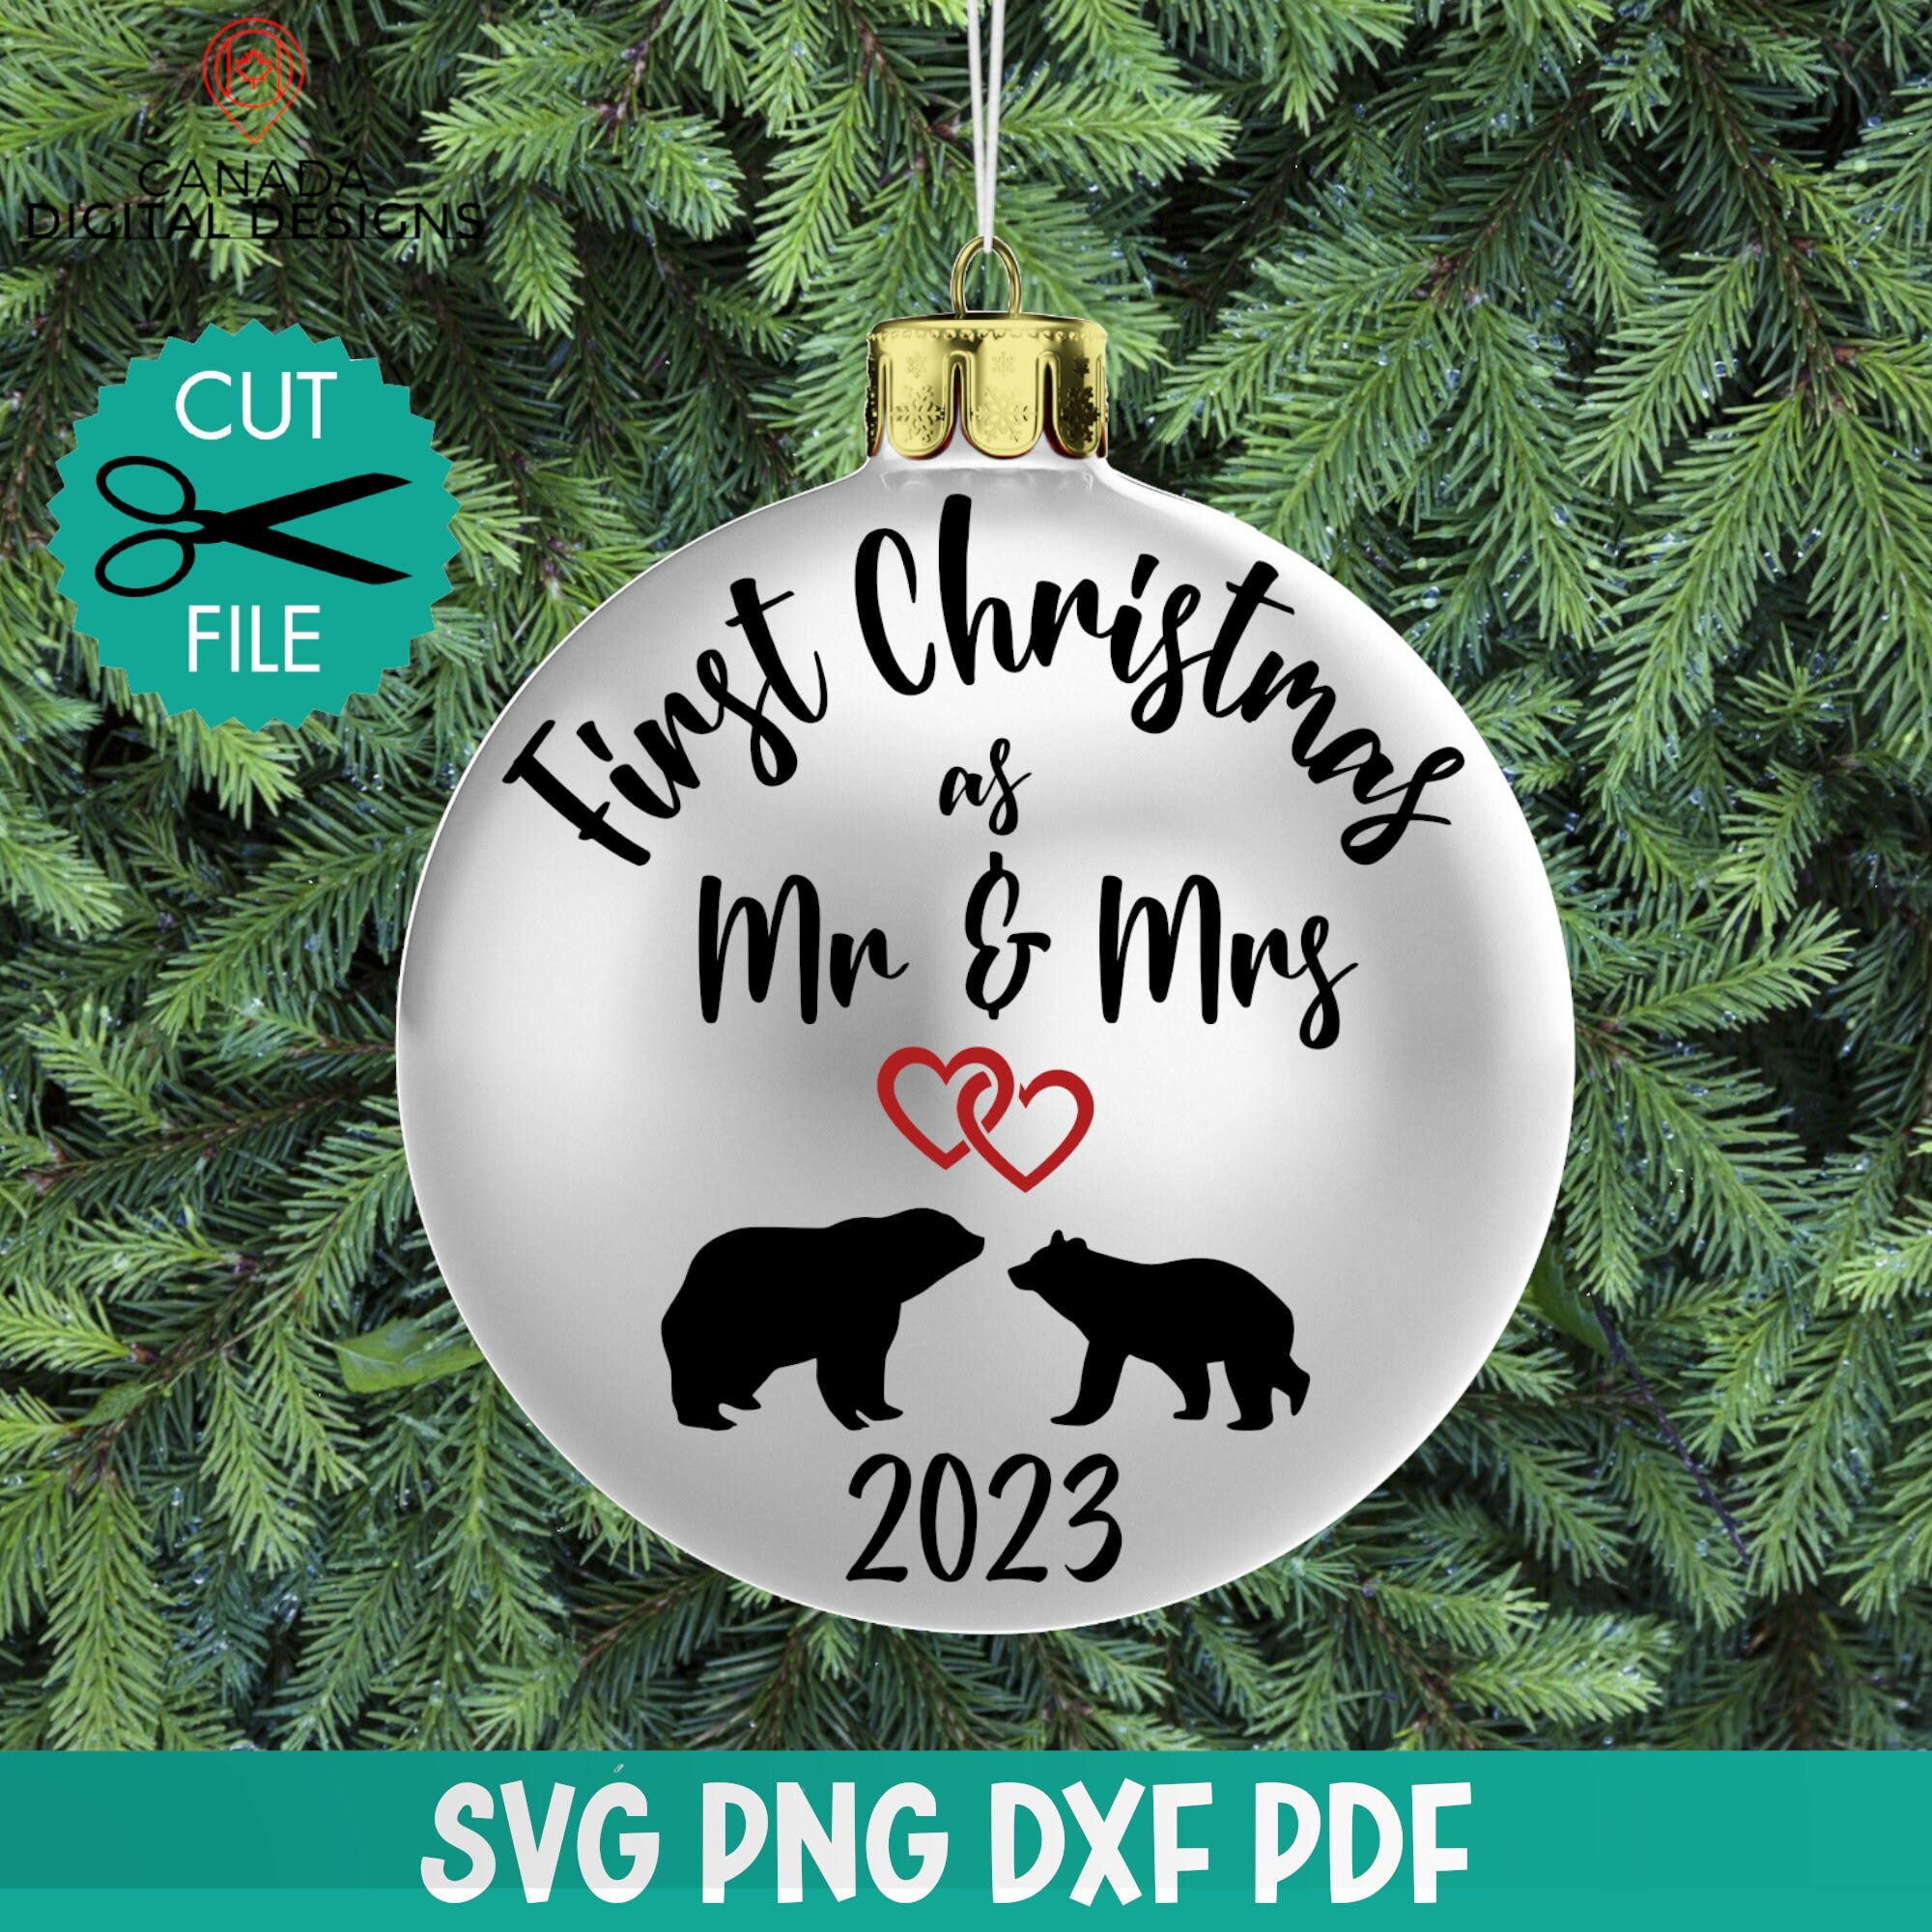 First Christmas as Mr & Mrs svg, Holiday ornament svg, First Christmas 2023 svg, First Christmas married svg, Bear silhouette svg, dxf png